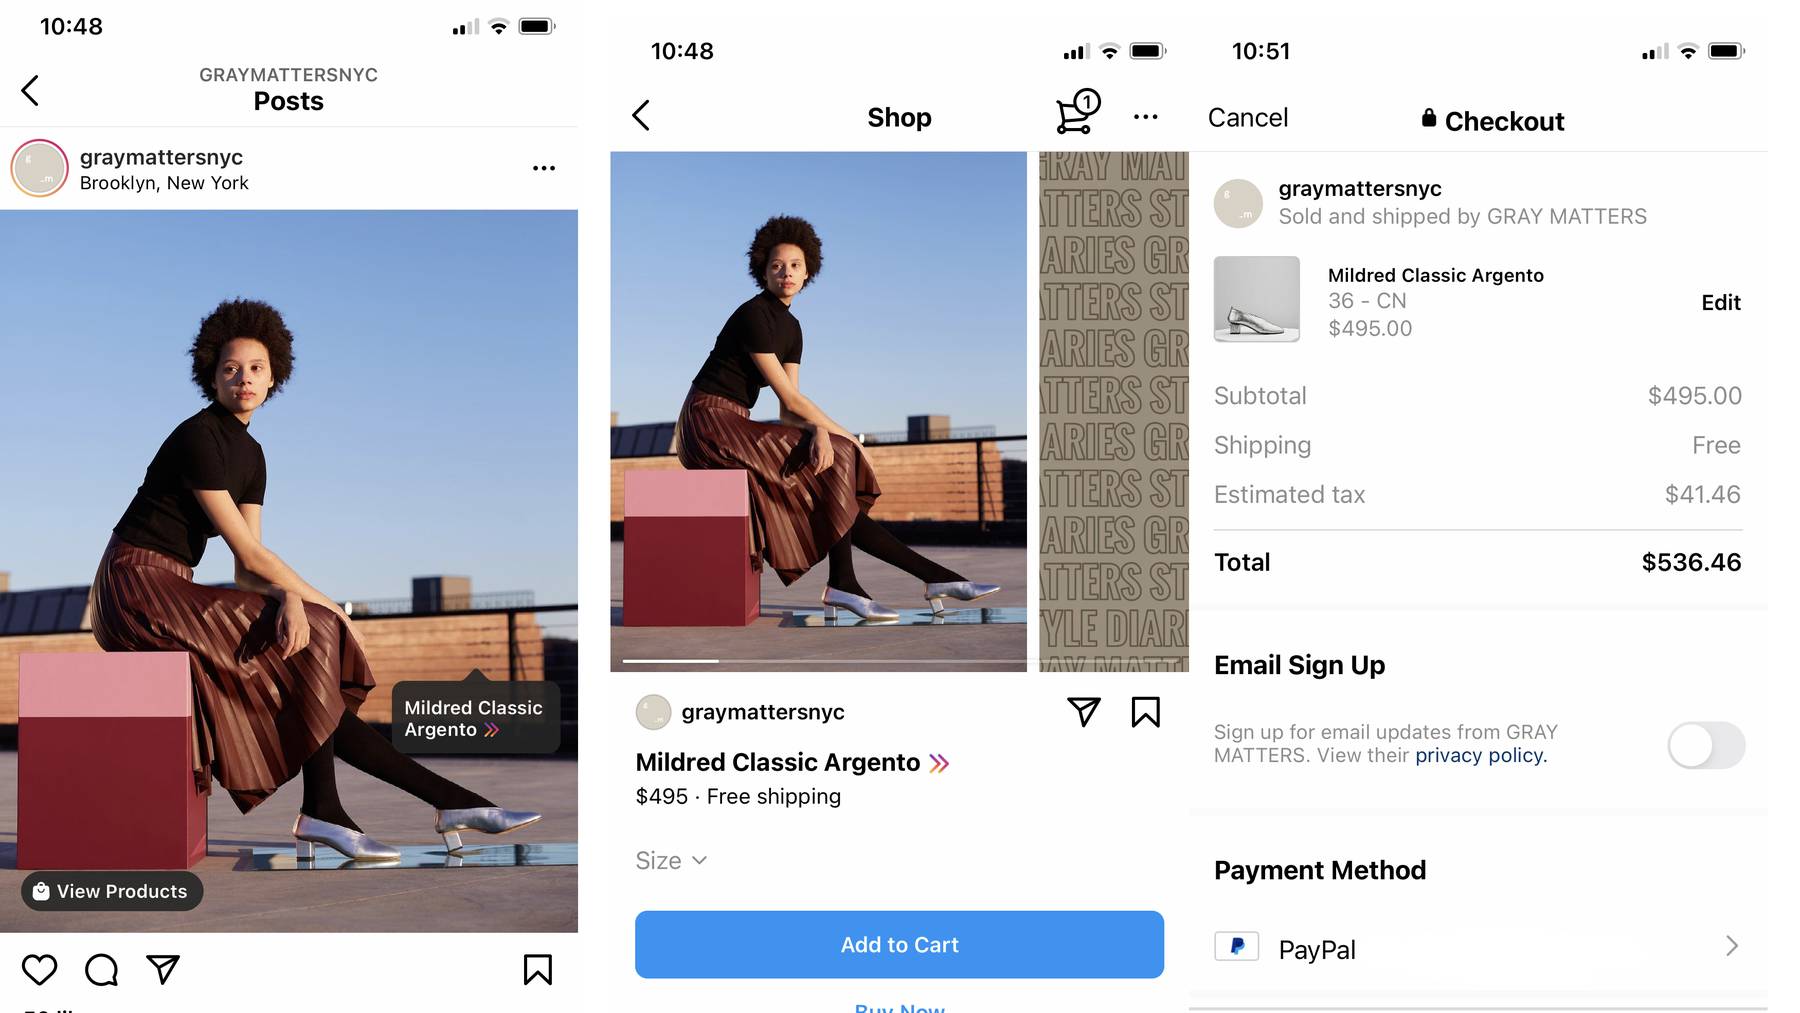 The Instagram Checkout process for Gray Matters.